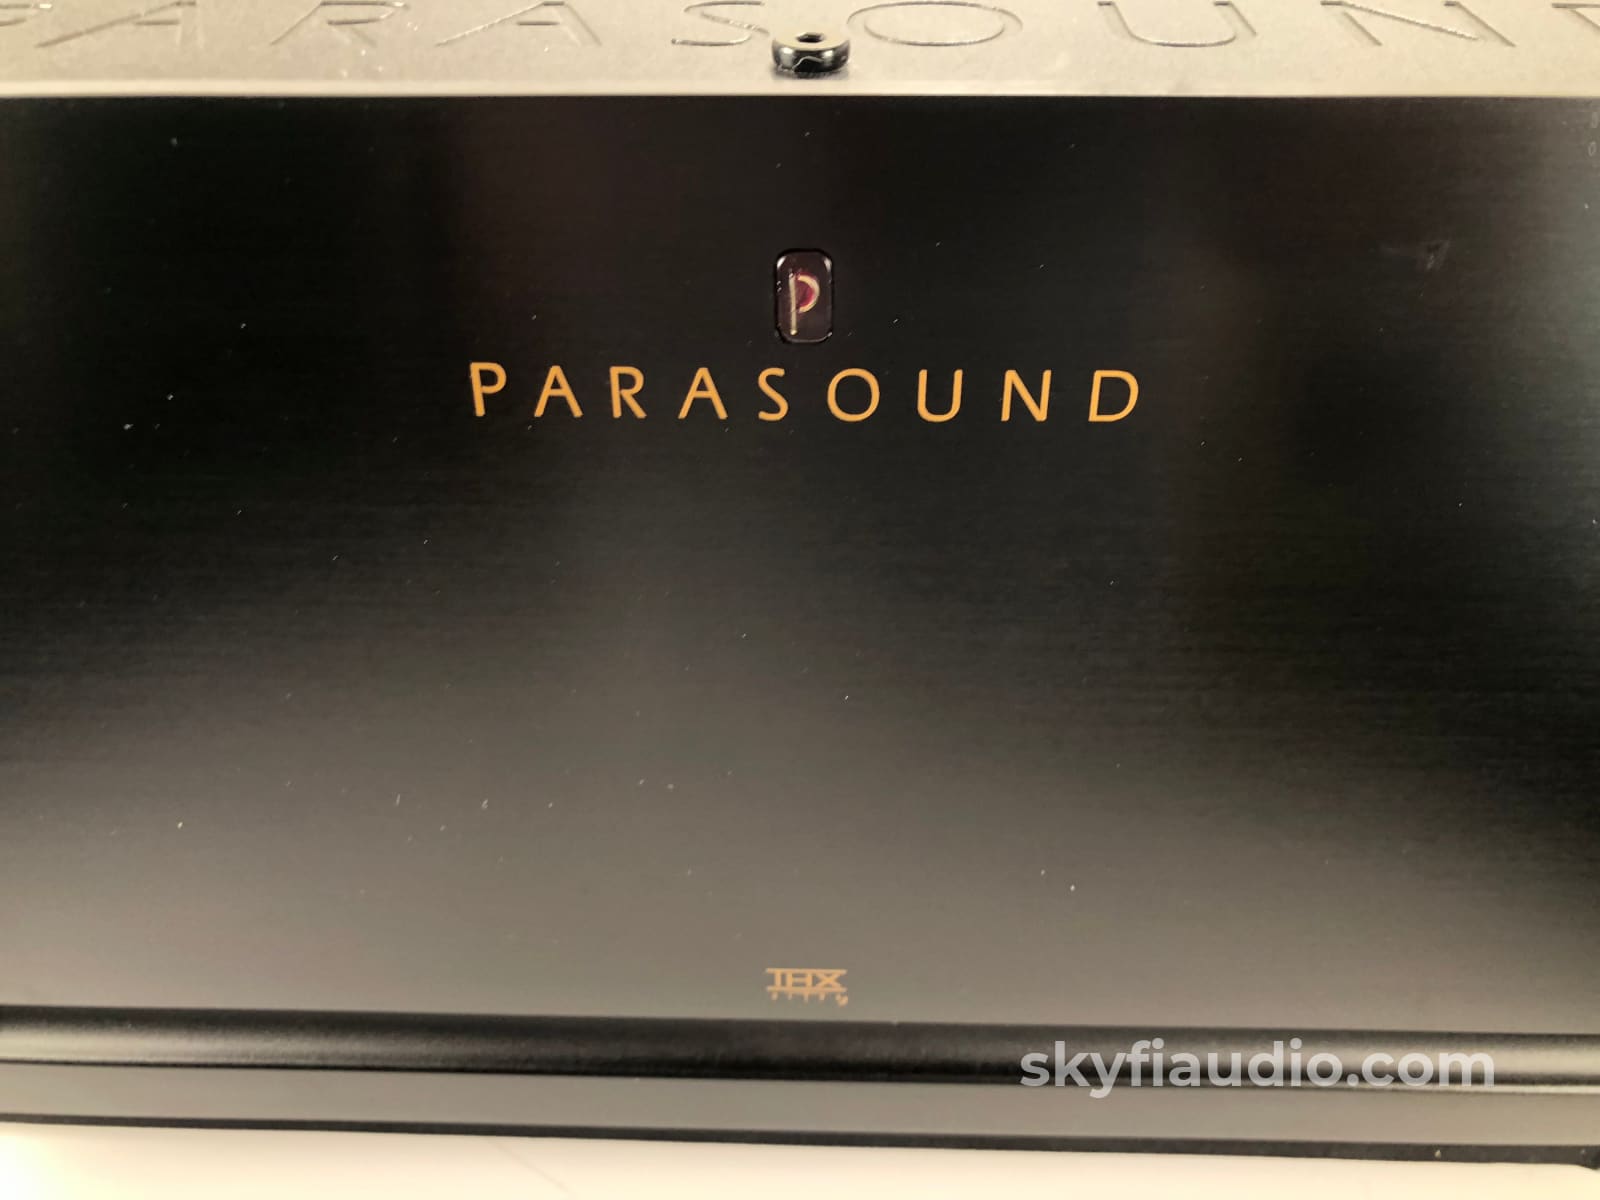 Parasound Halo A21 Amplifier In Black - Complete And Like New